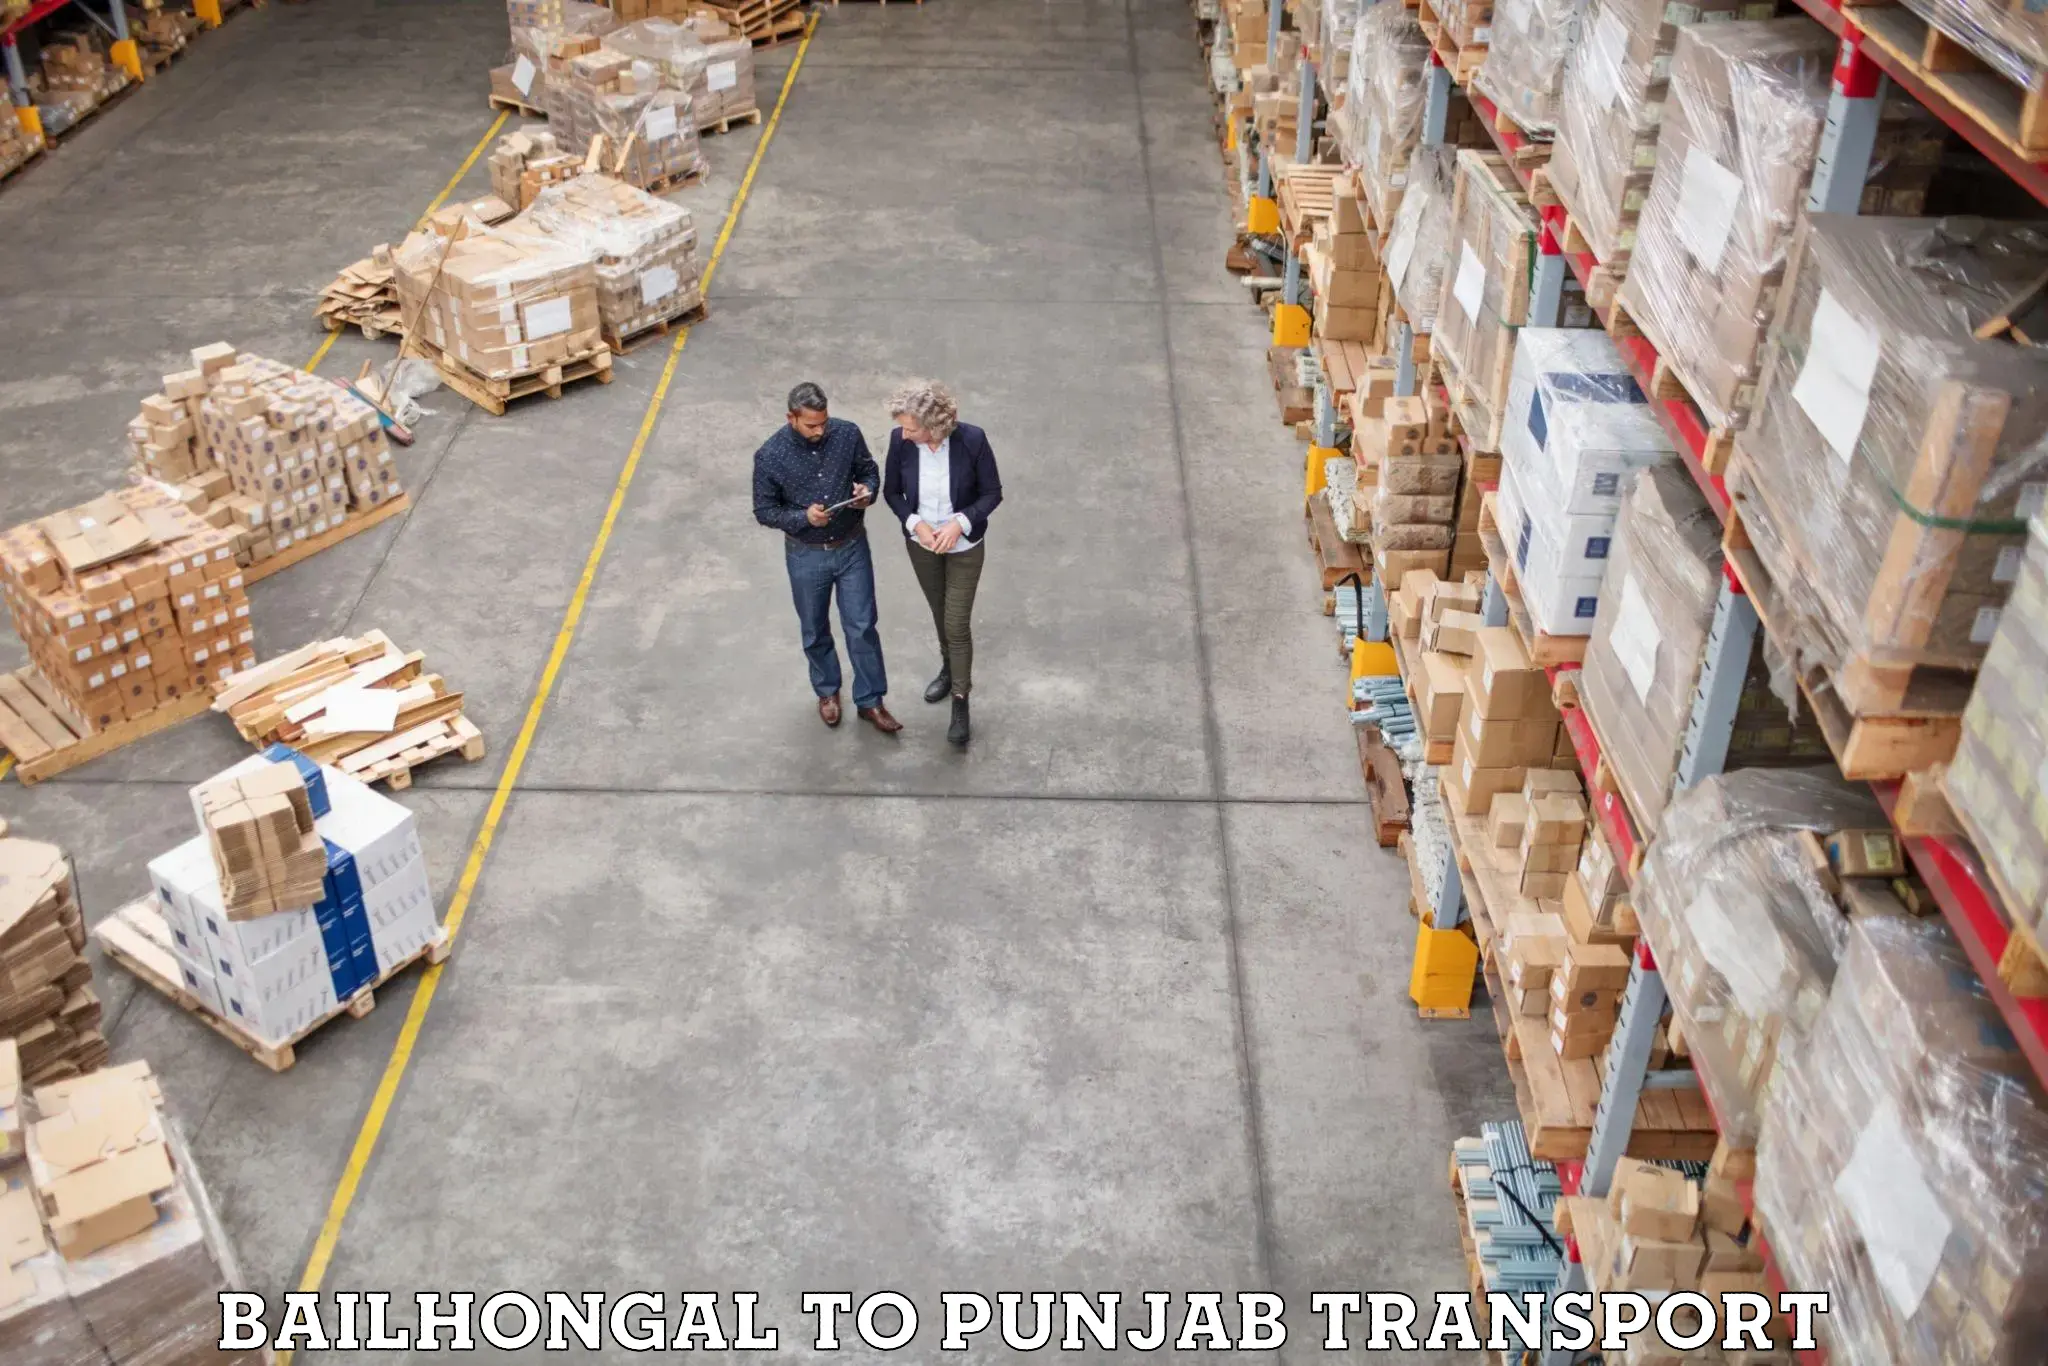 Daily parcel service transport Bailhongal to Firozpur